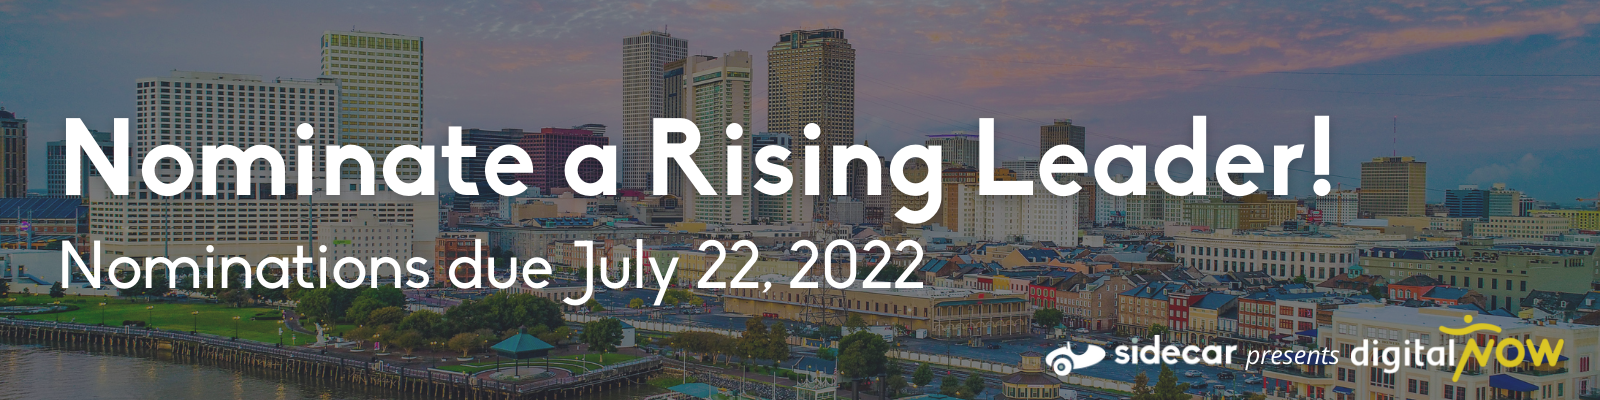 Nominate a Rising Leader for digitalNow 2022